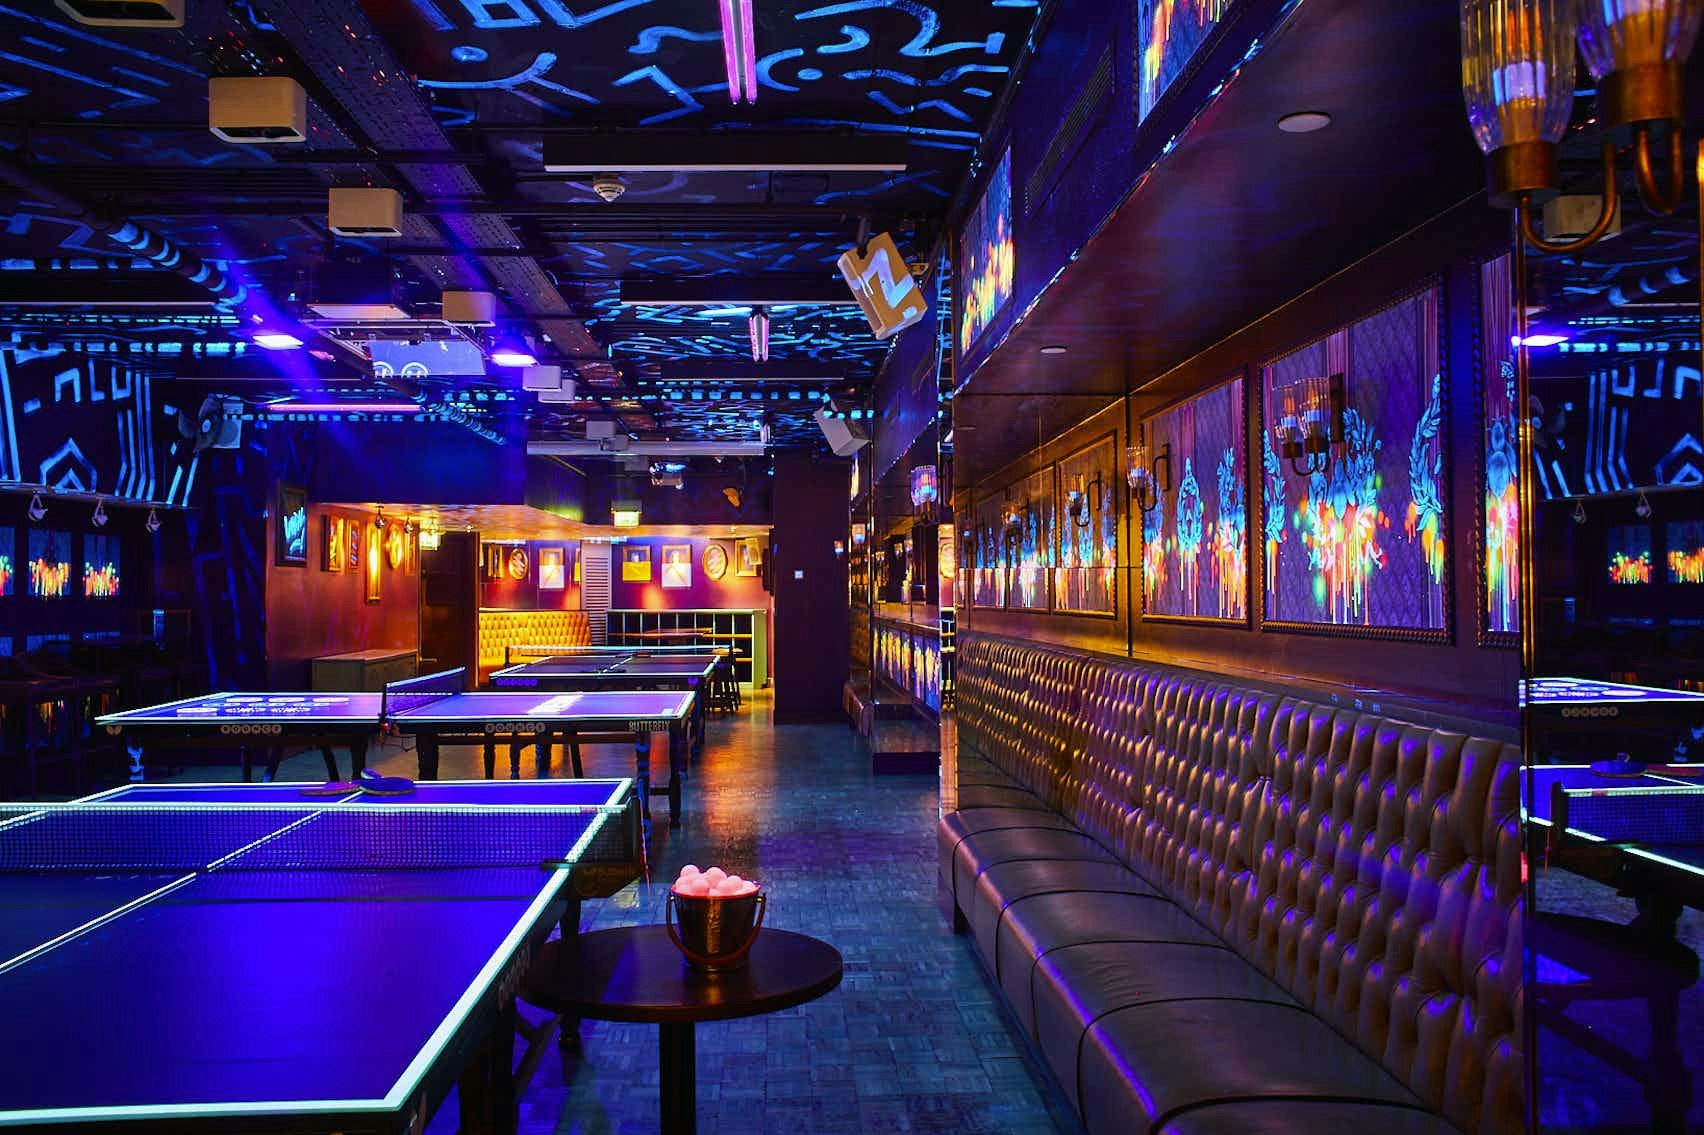 Large Party Venues in London - Bounce, the home of Ping Pong | Holborn